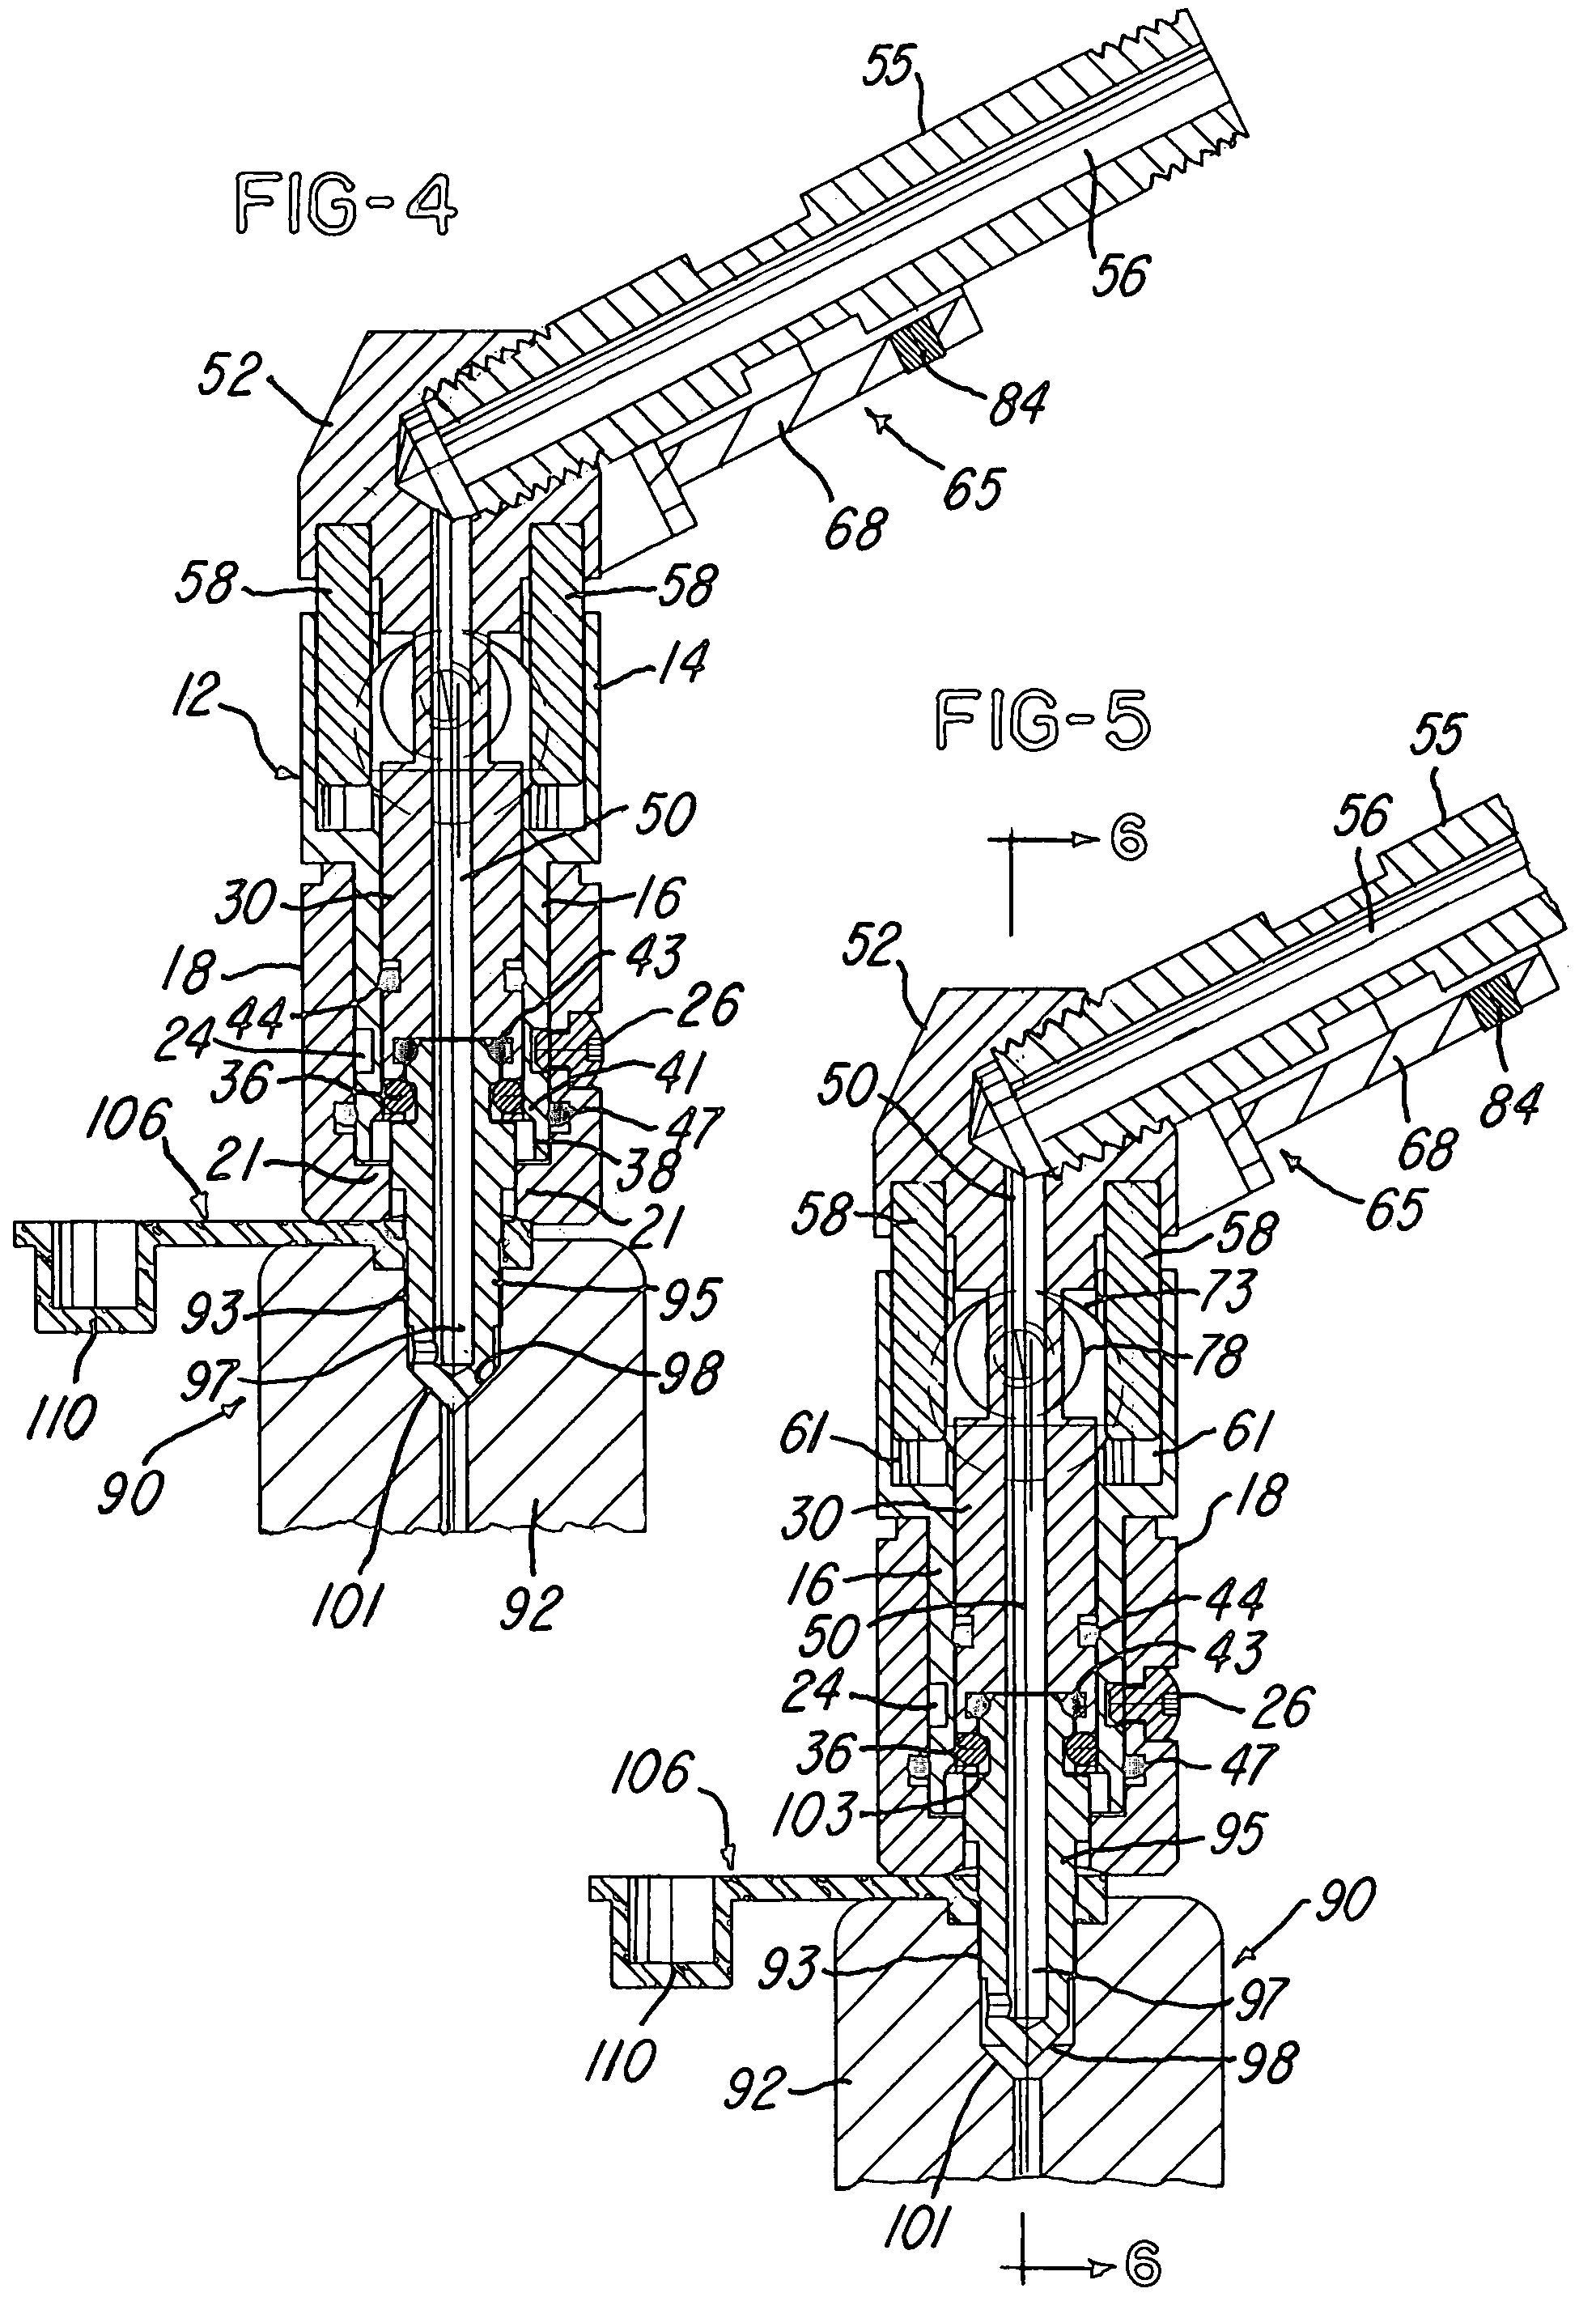 Tool assembly for evacuating, vacuum testing and charging a fluid system through a bleeder valve